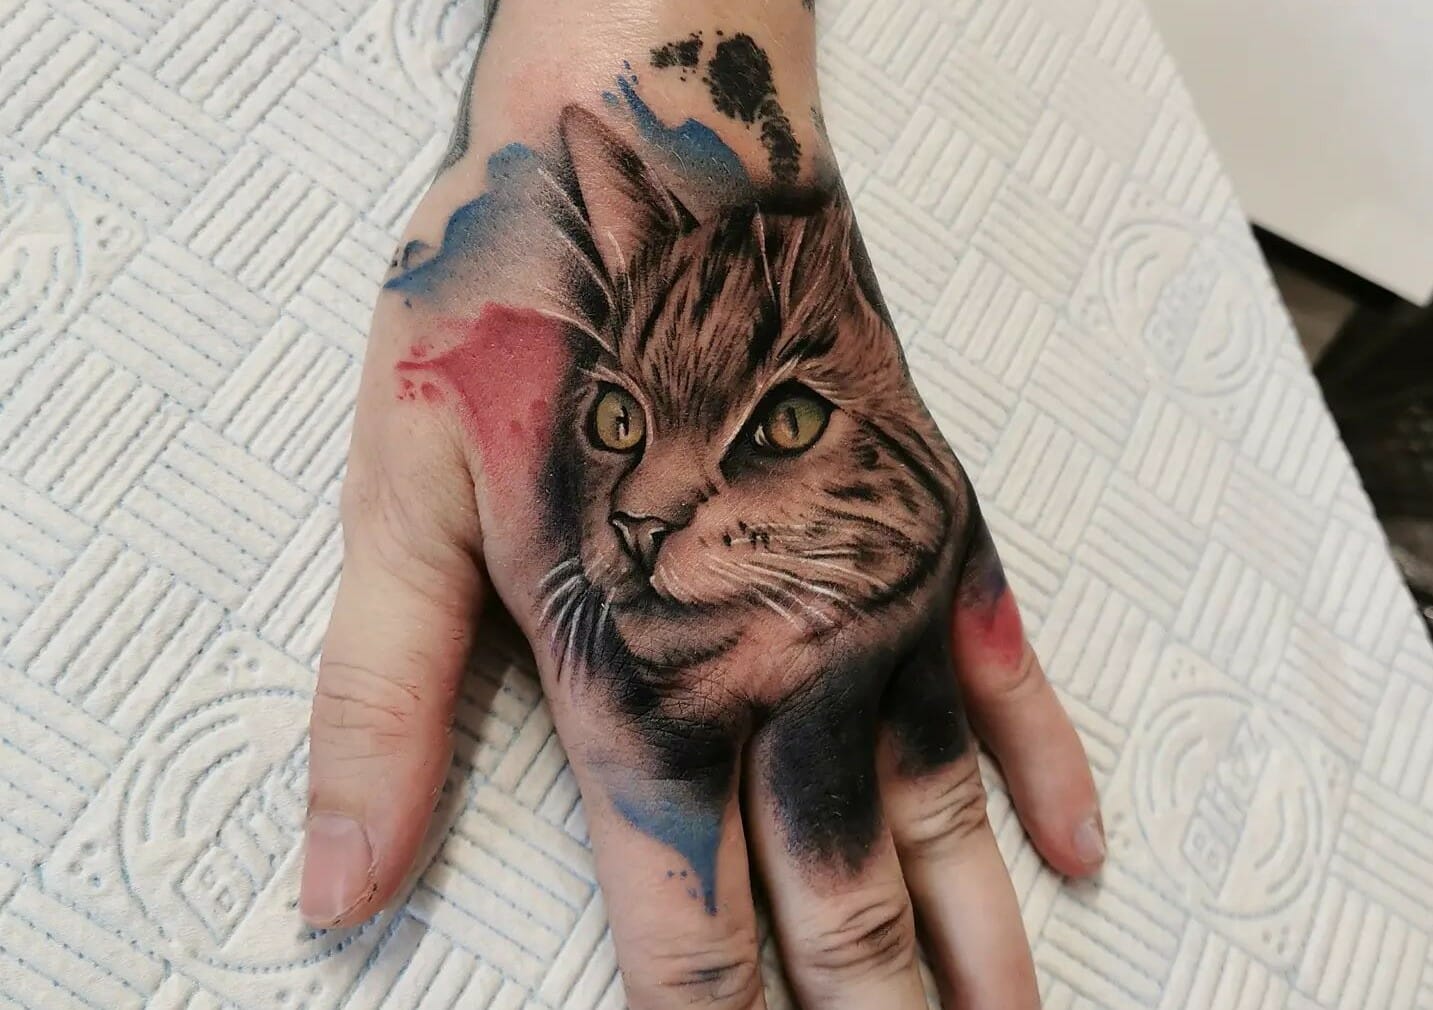 40 Traditional Cat Tattoos